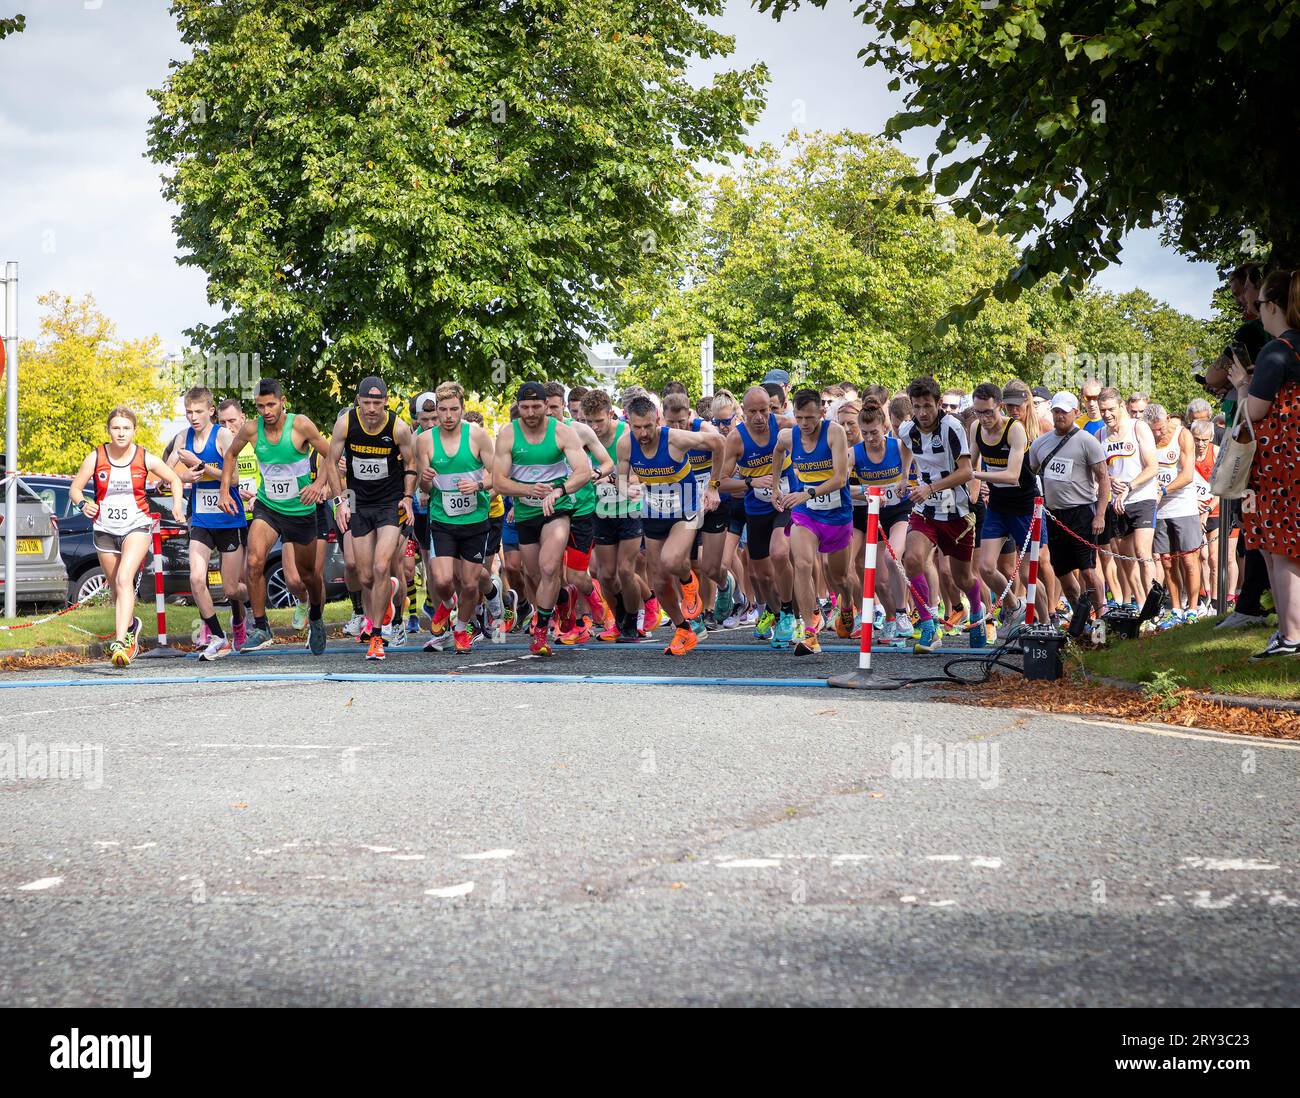 Spectrum Striders Running Club marked their 40th Anniversary with The Birchwood 10K Race 2023. They are striving to be The Greenest Race in the North0 Stock Photo